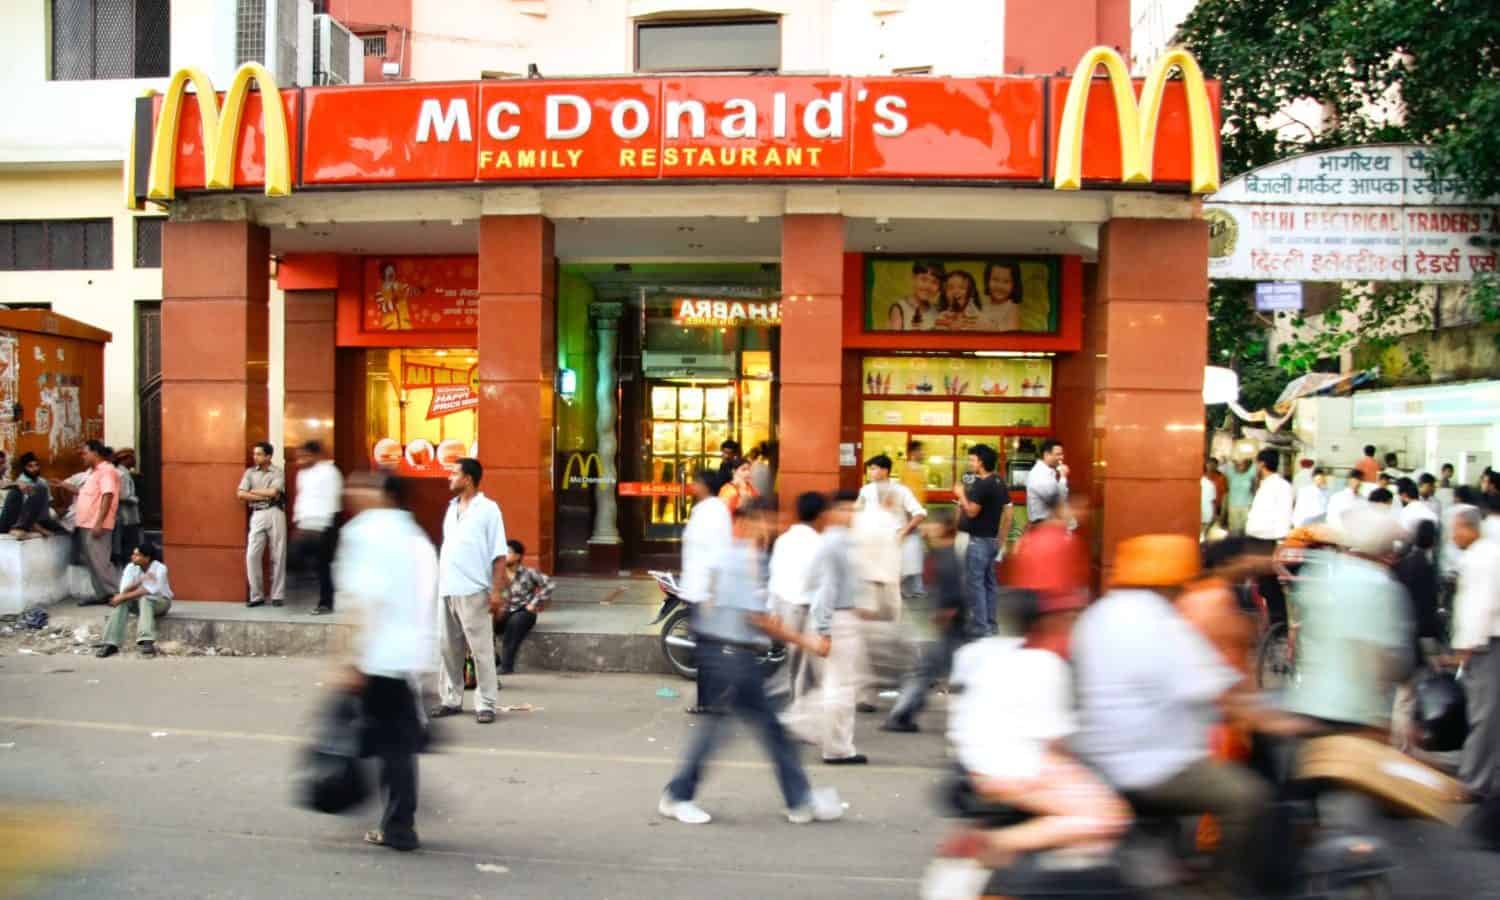 The fast-food business is booming in India, and so too are diabetes rates. What can be done?